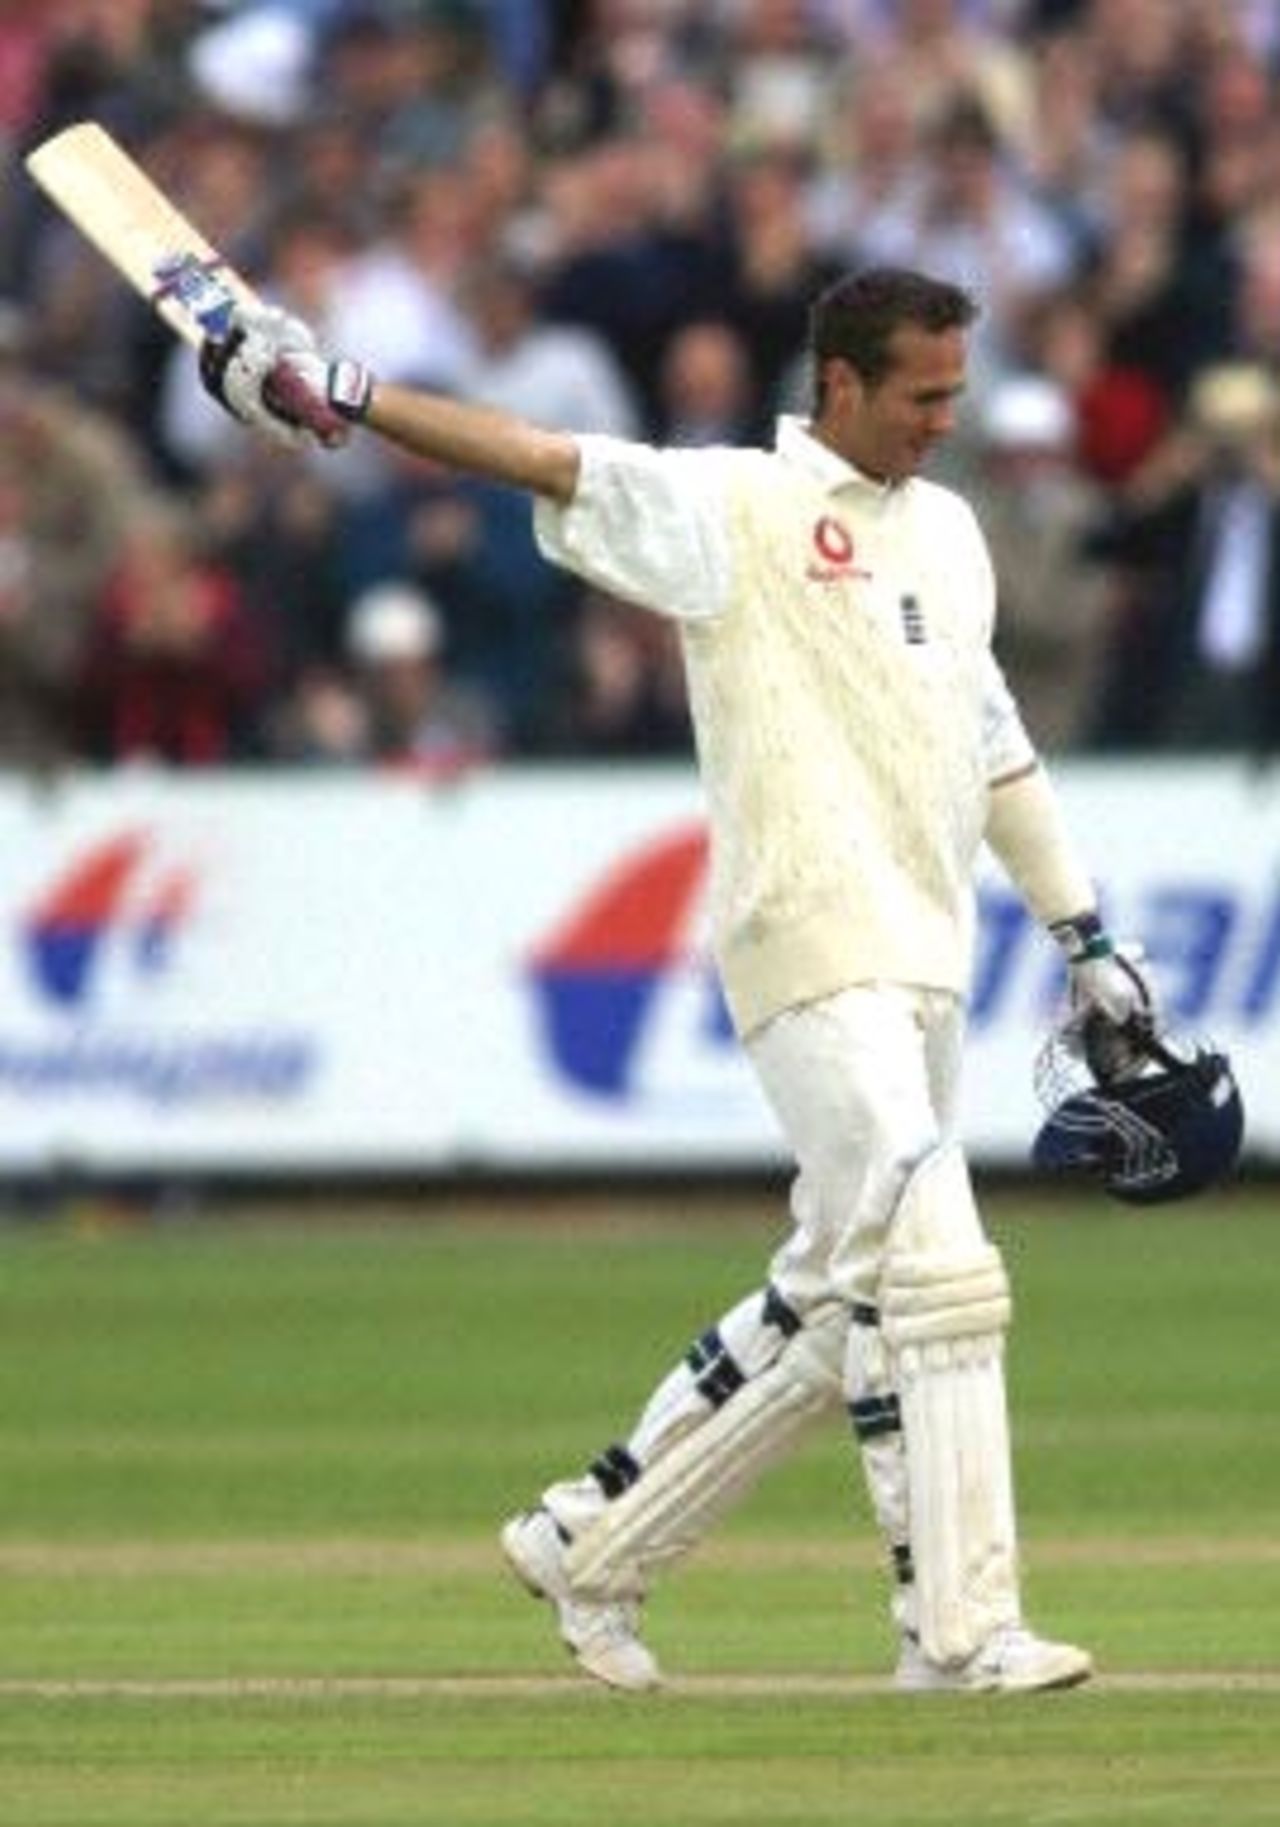 Michael Vaughan celebrating his century, day 3, 2nd Test at Old Trafford, 17-21 May 2001.